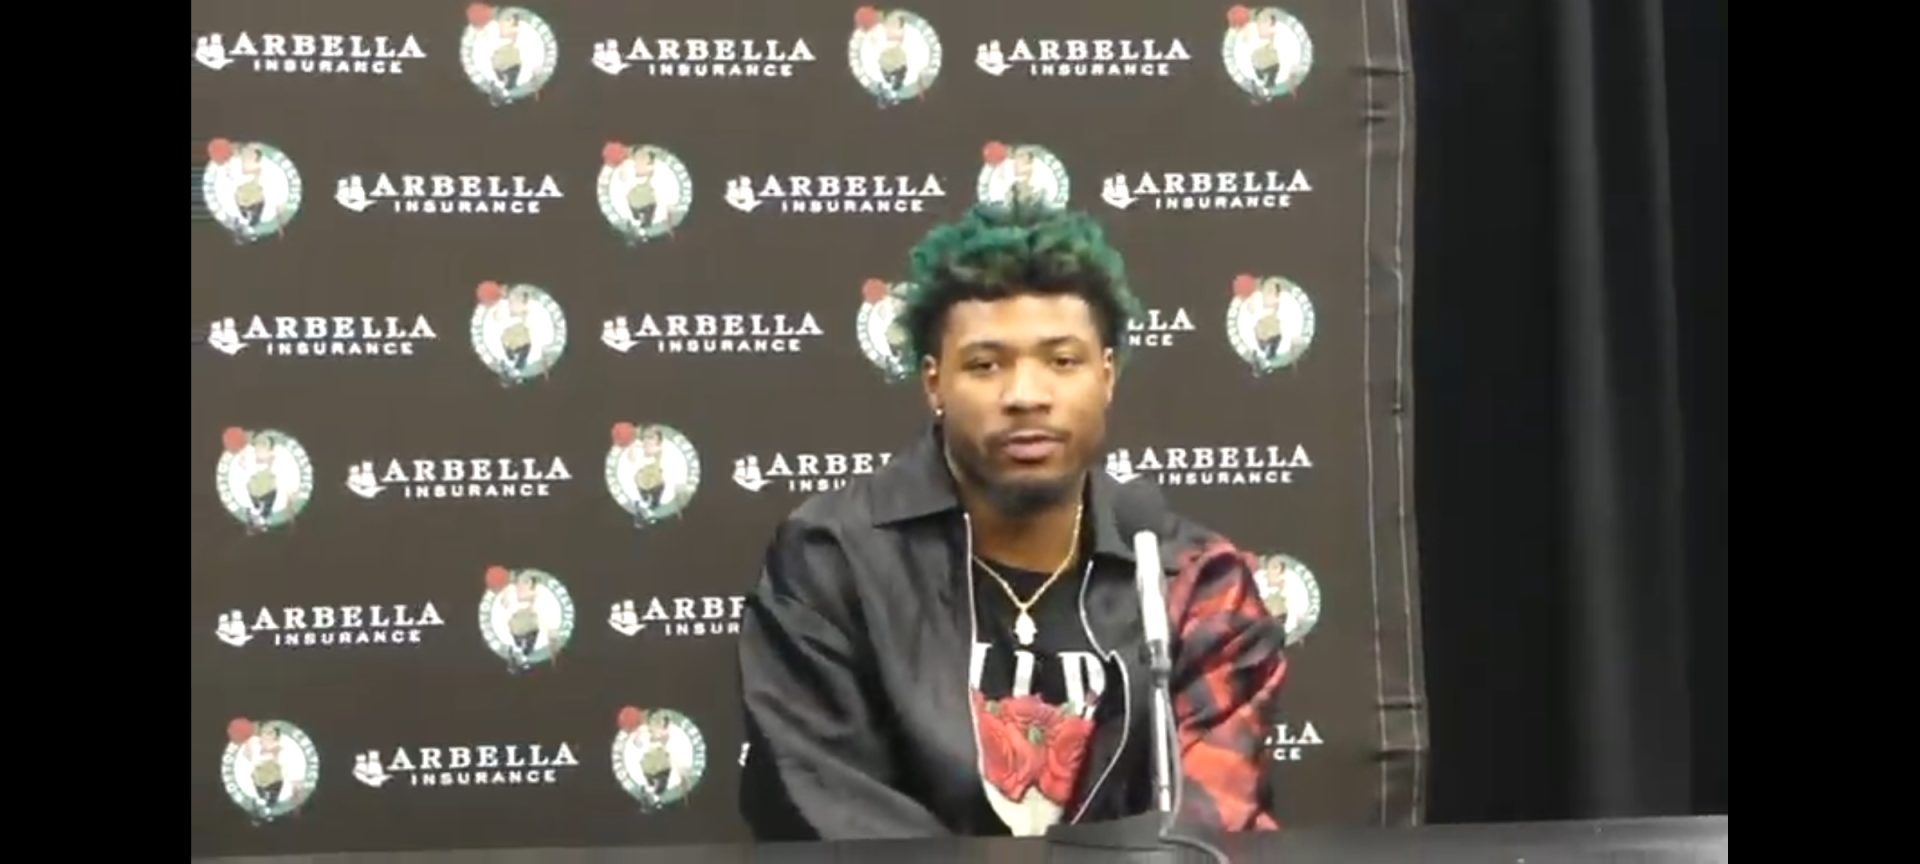 Marcus Smart speaks with the media after a Boston Celtics game (Photo by Derrel Jazz Johnson for rolling out)